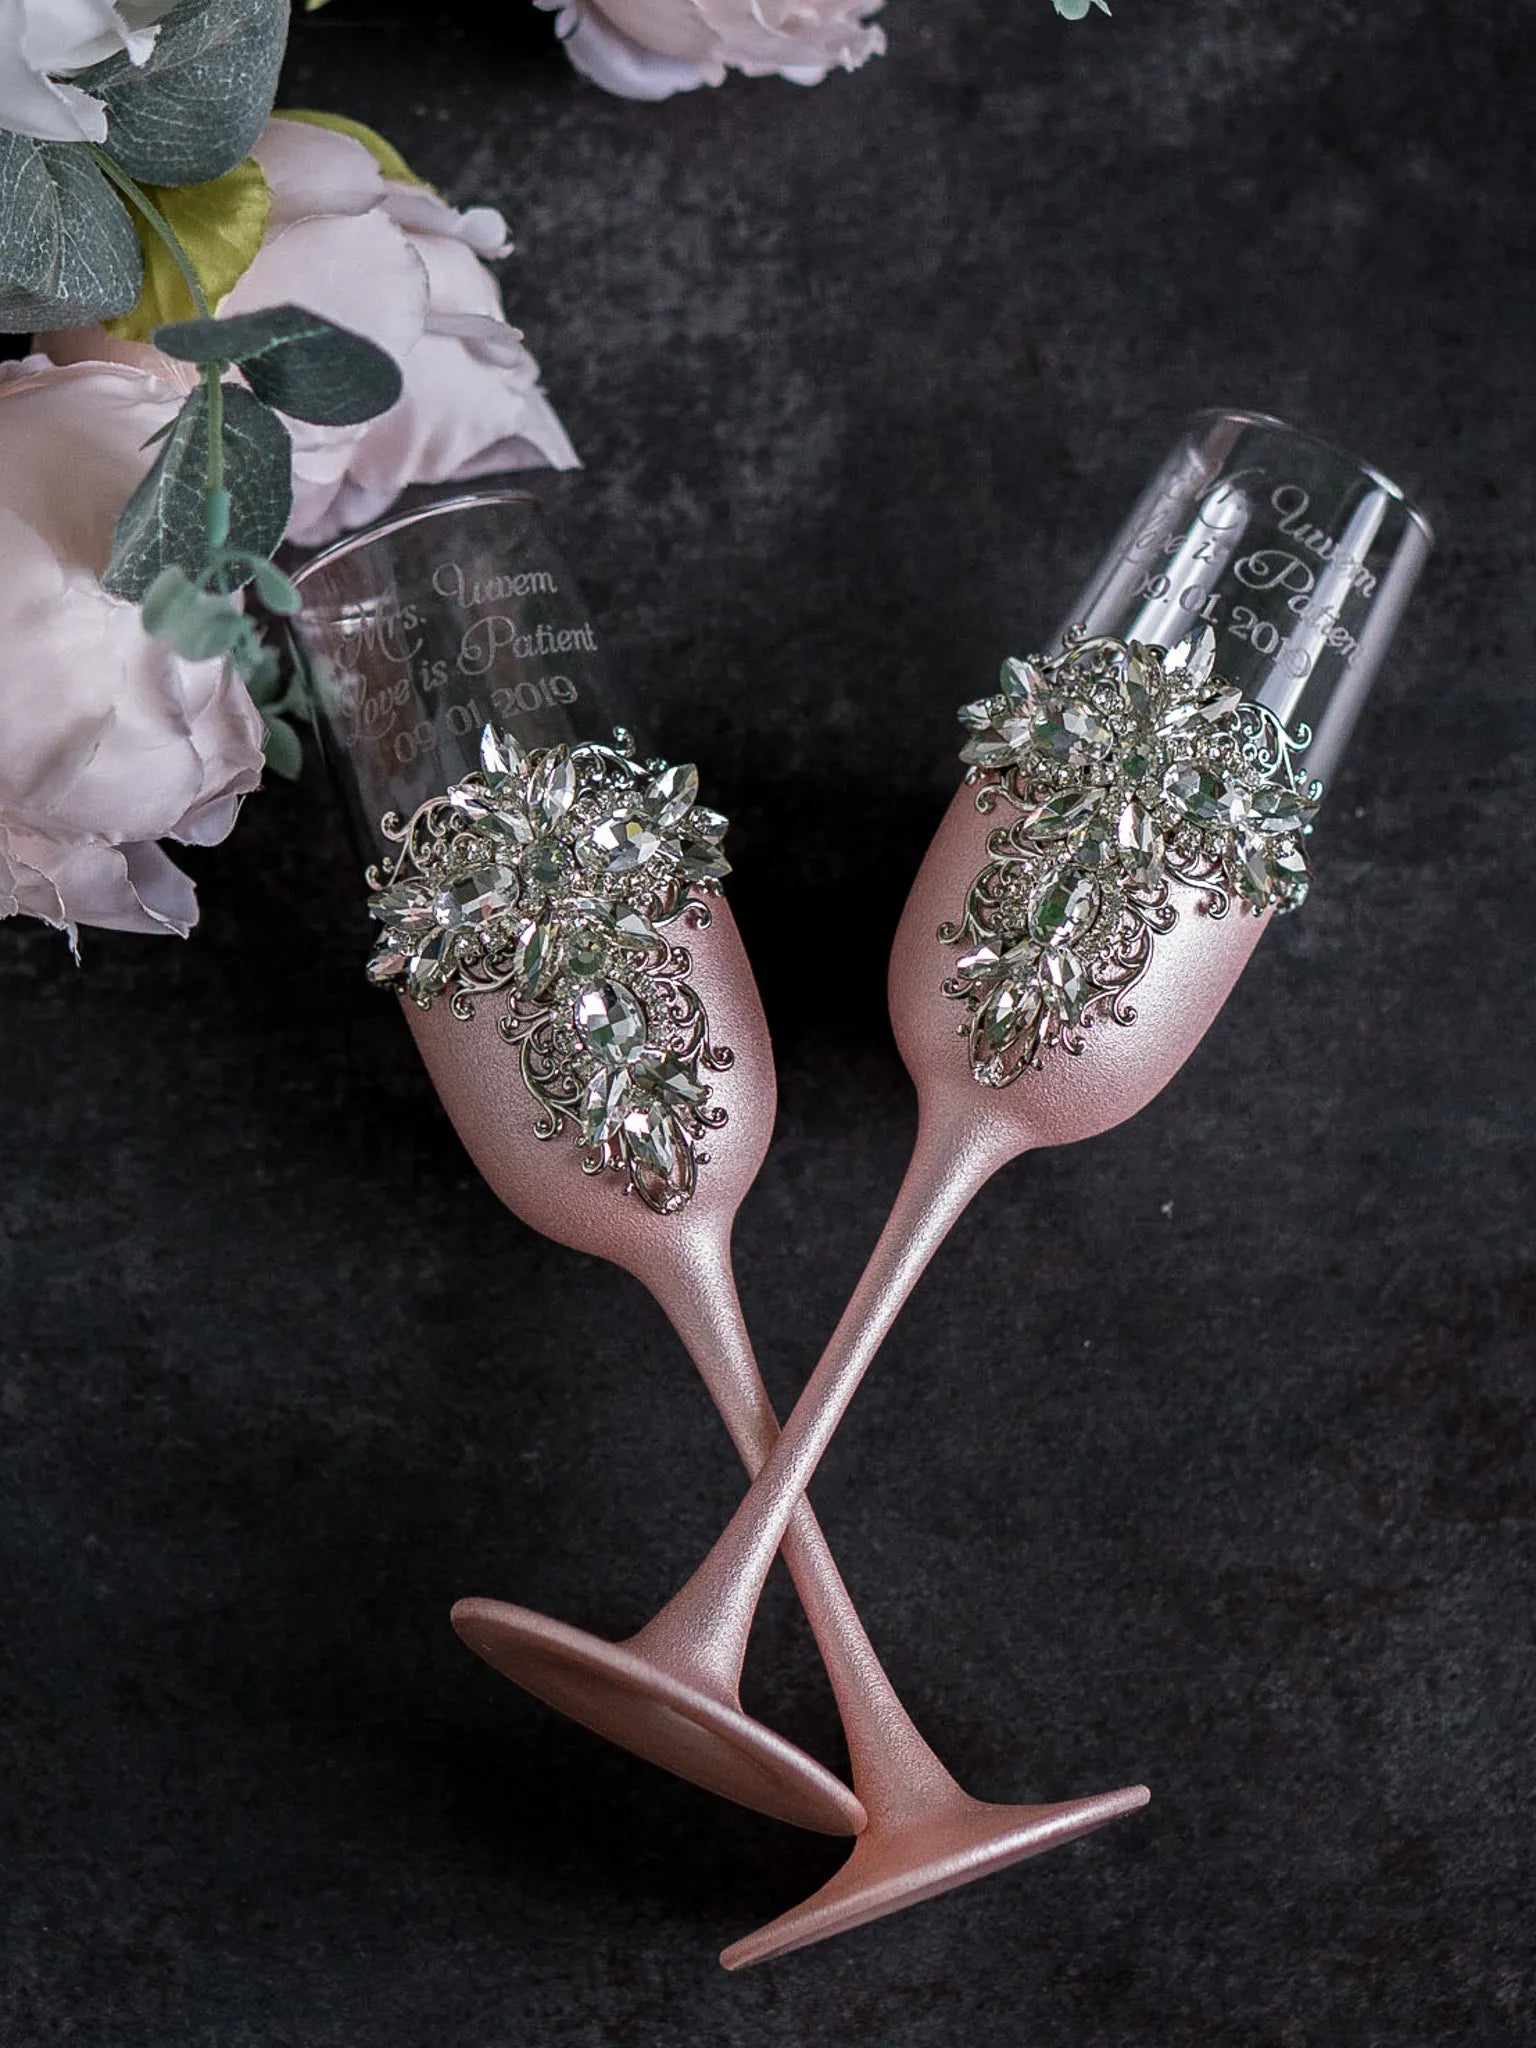 Special occasion toasting flutes in metallic hues